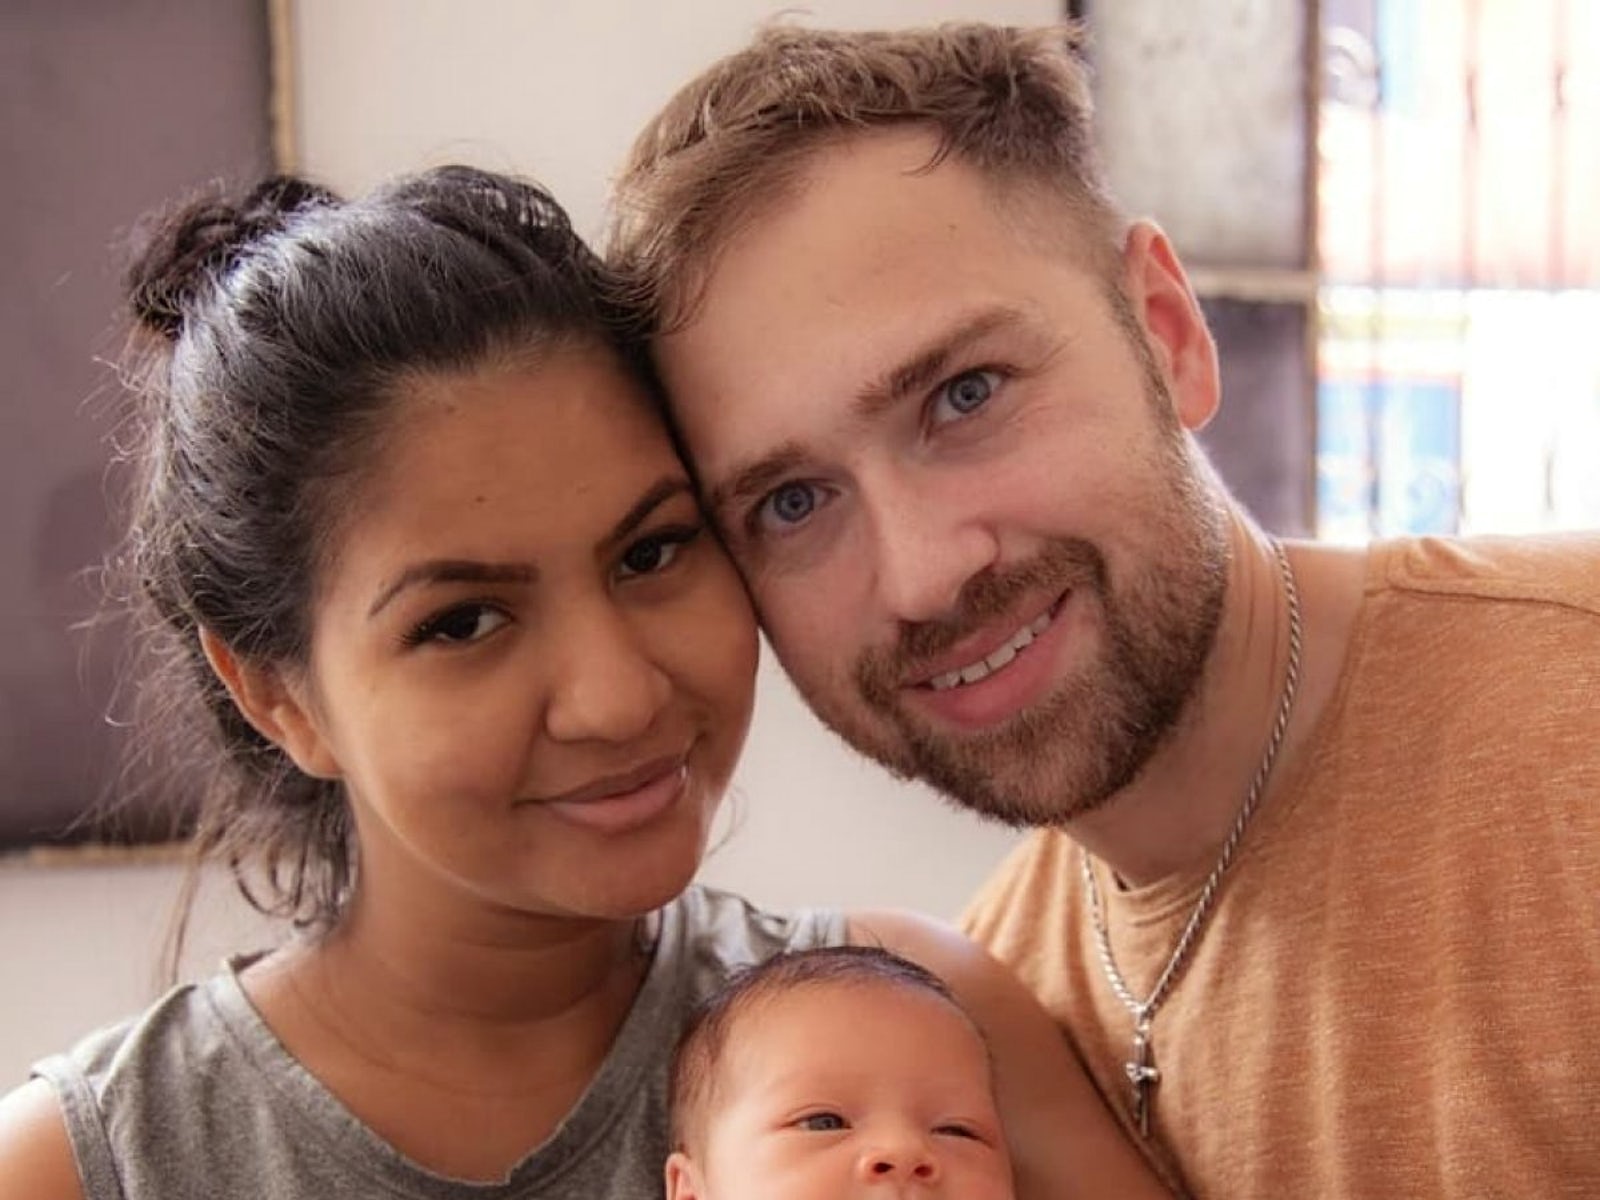 '90 Day Fiance' spoilers Are Karine Martins and Paul Staehle still